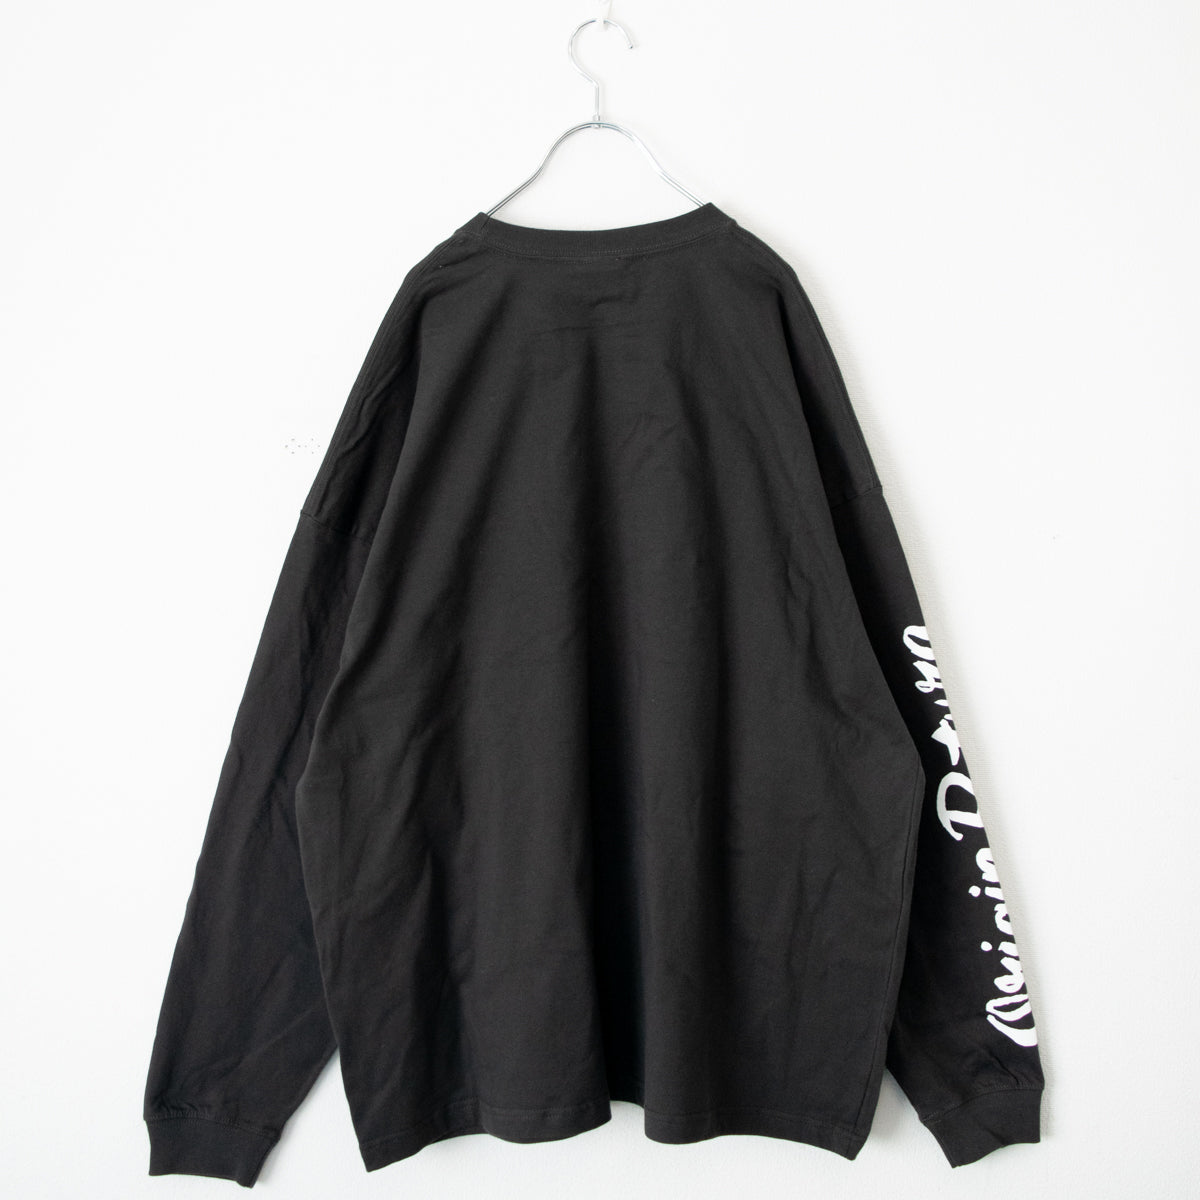 [Shipping in late May] 404 NOT FOUND by Gummy Big Silhouette Long Sleeve T-Shirt CHARCOAL